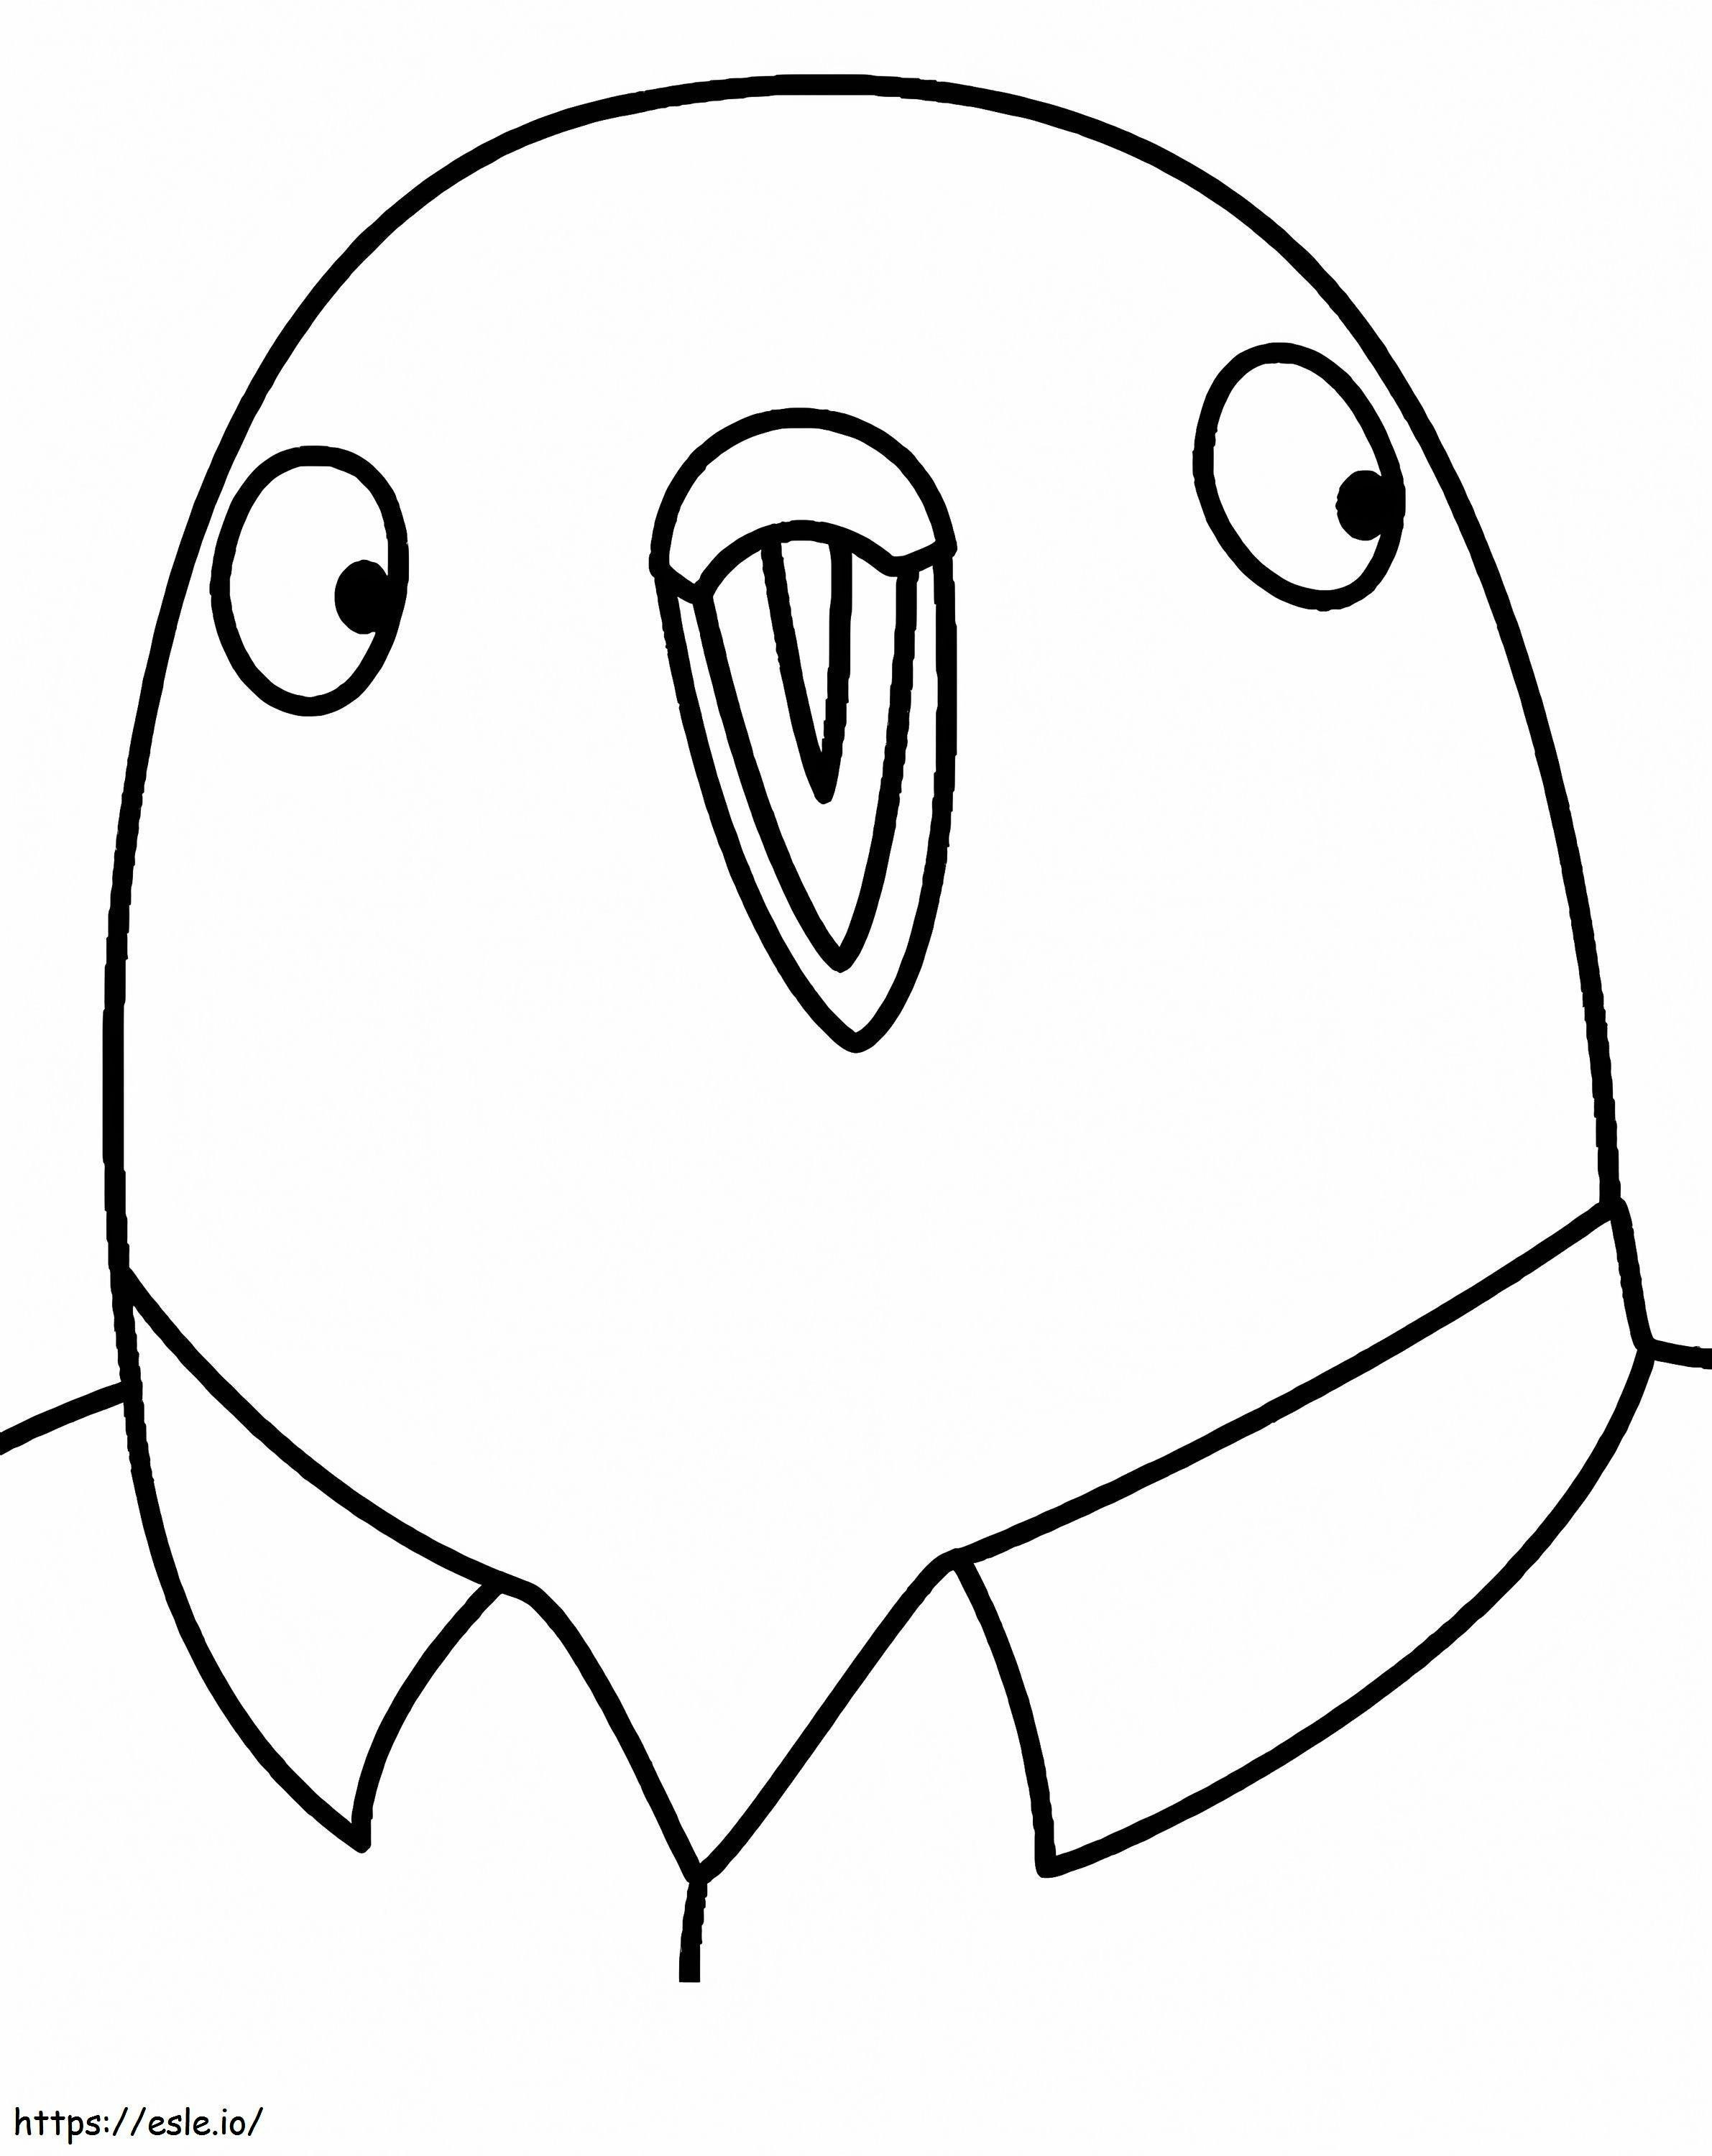 Character Speckle From Tuca And Bertie coloring page